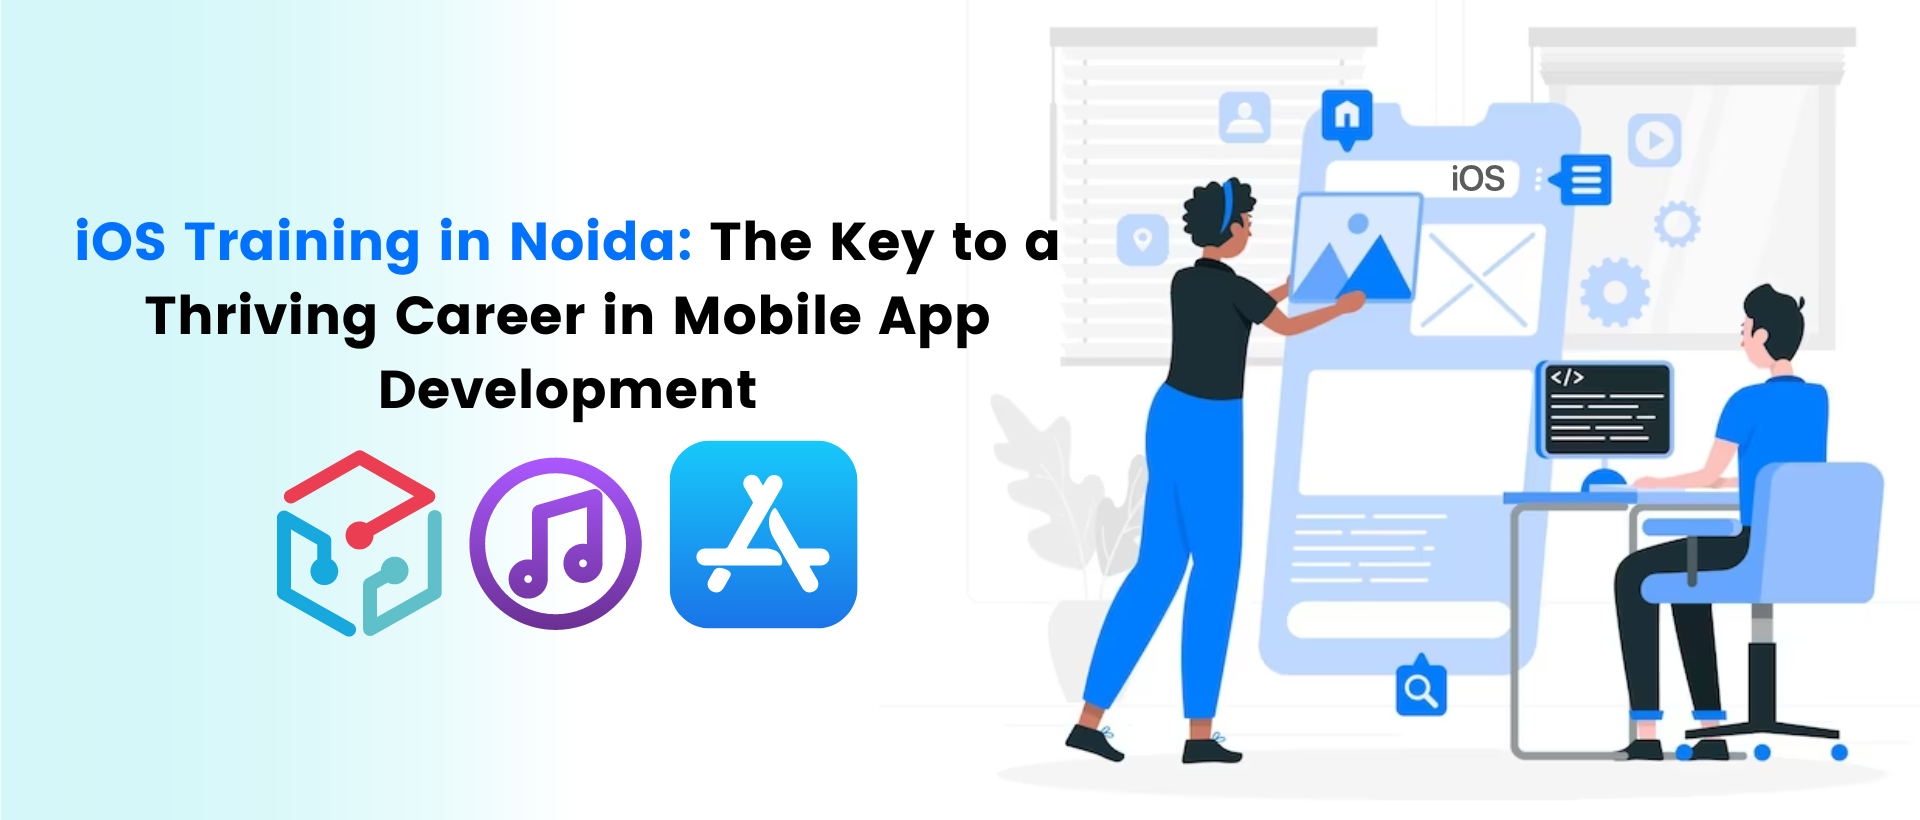 Ios training in noida: the key to a thriving career in mobile app development